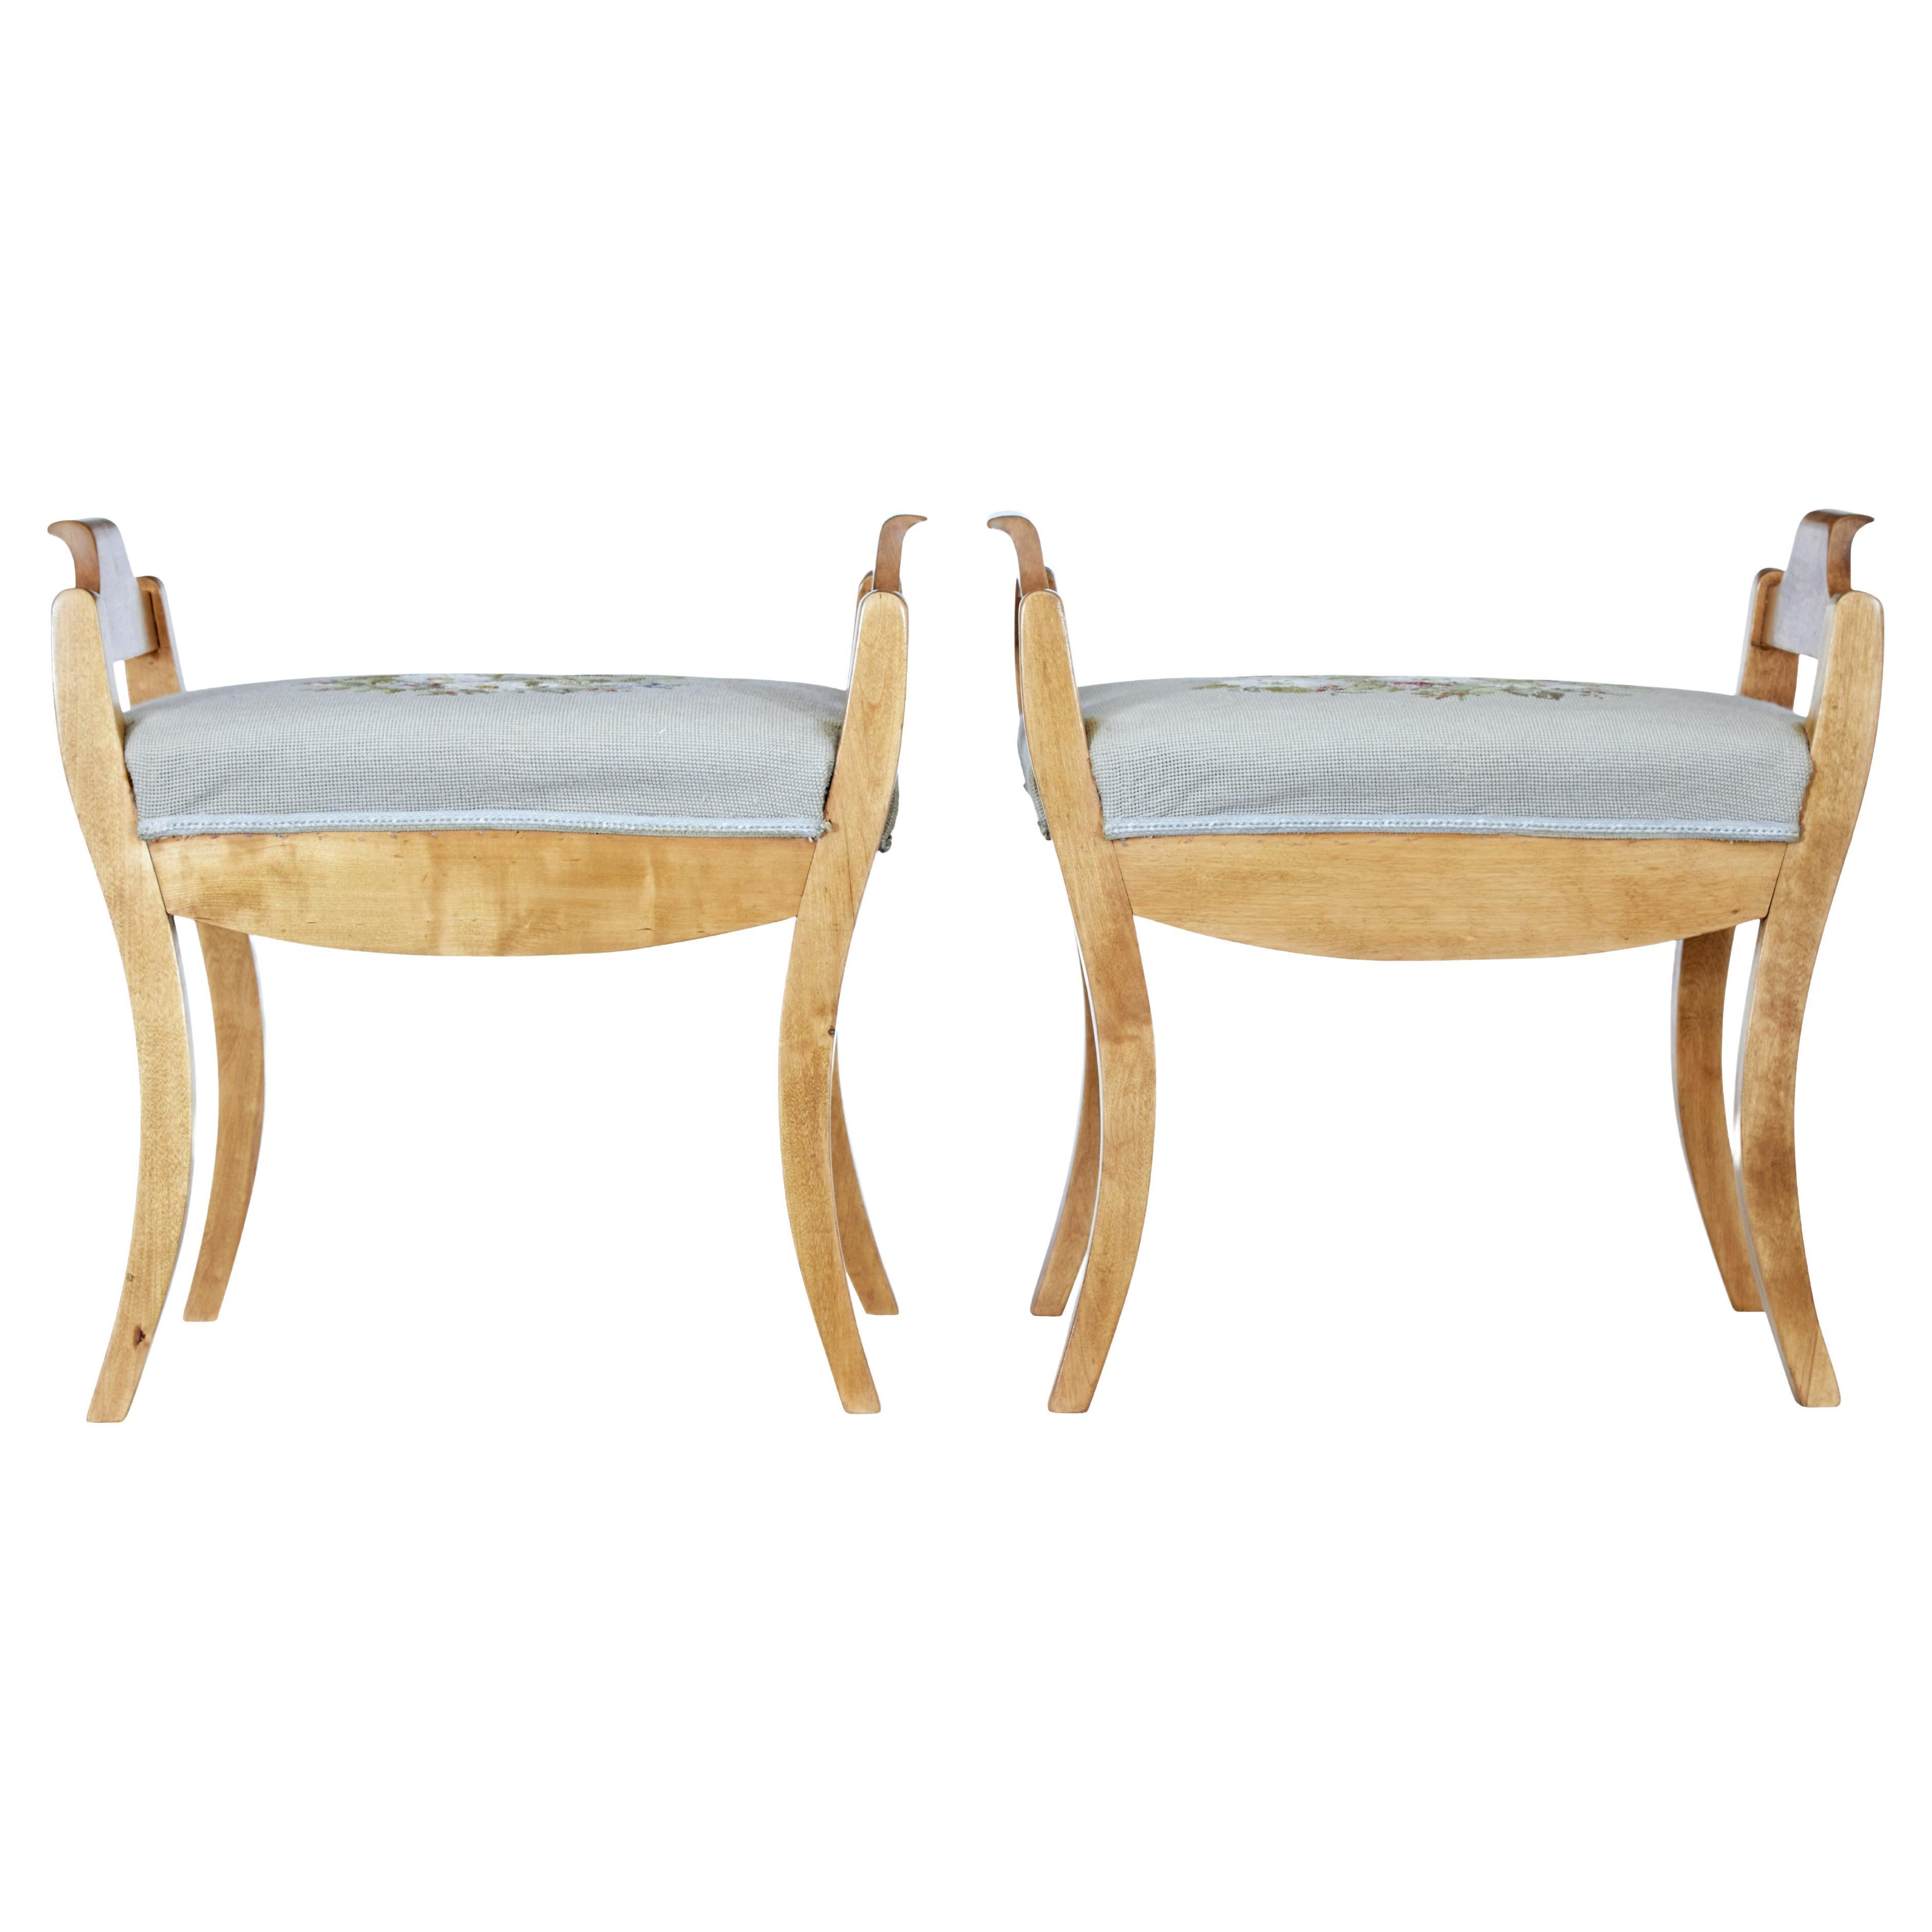 English Turn of the Century Birch Stools with Curving Arms and Saber Legs